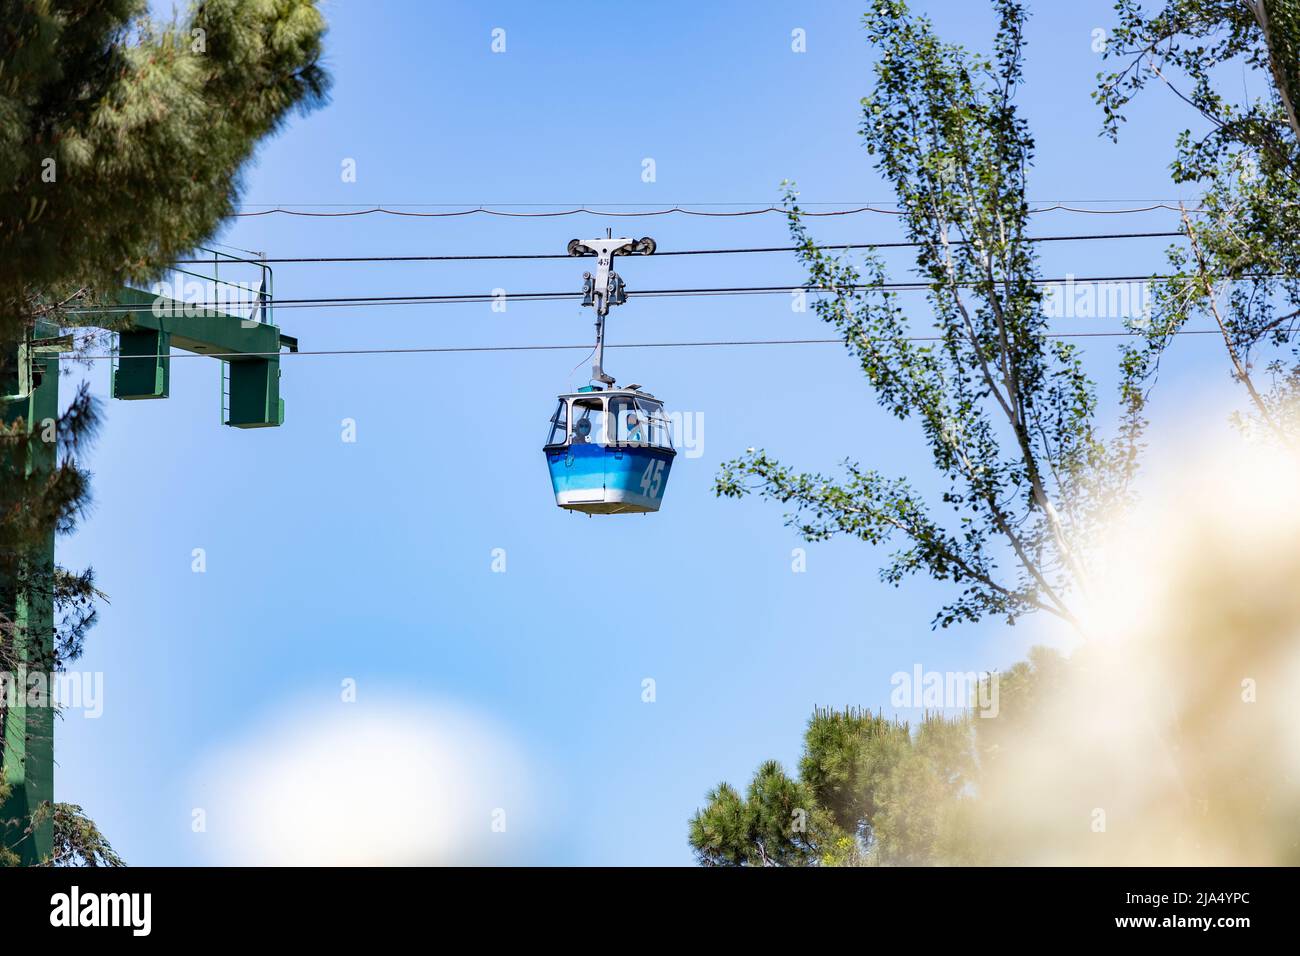 Cableway. Cable car in Madrid that connects the Parque del Oeste with the Casa de Campo in Madrid. Clear day with a blue sky, in Spain. Europe. Photo Stock Photo